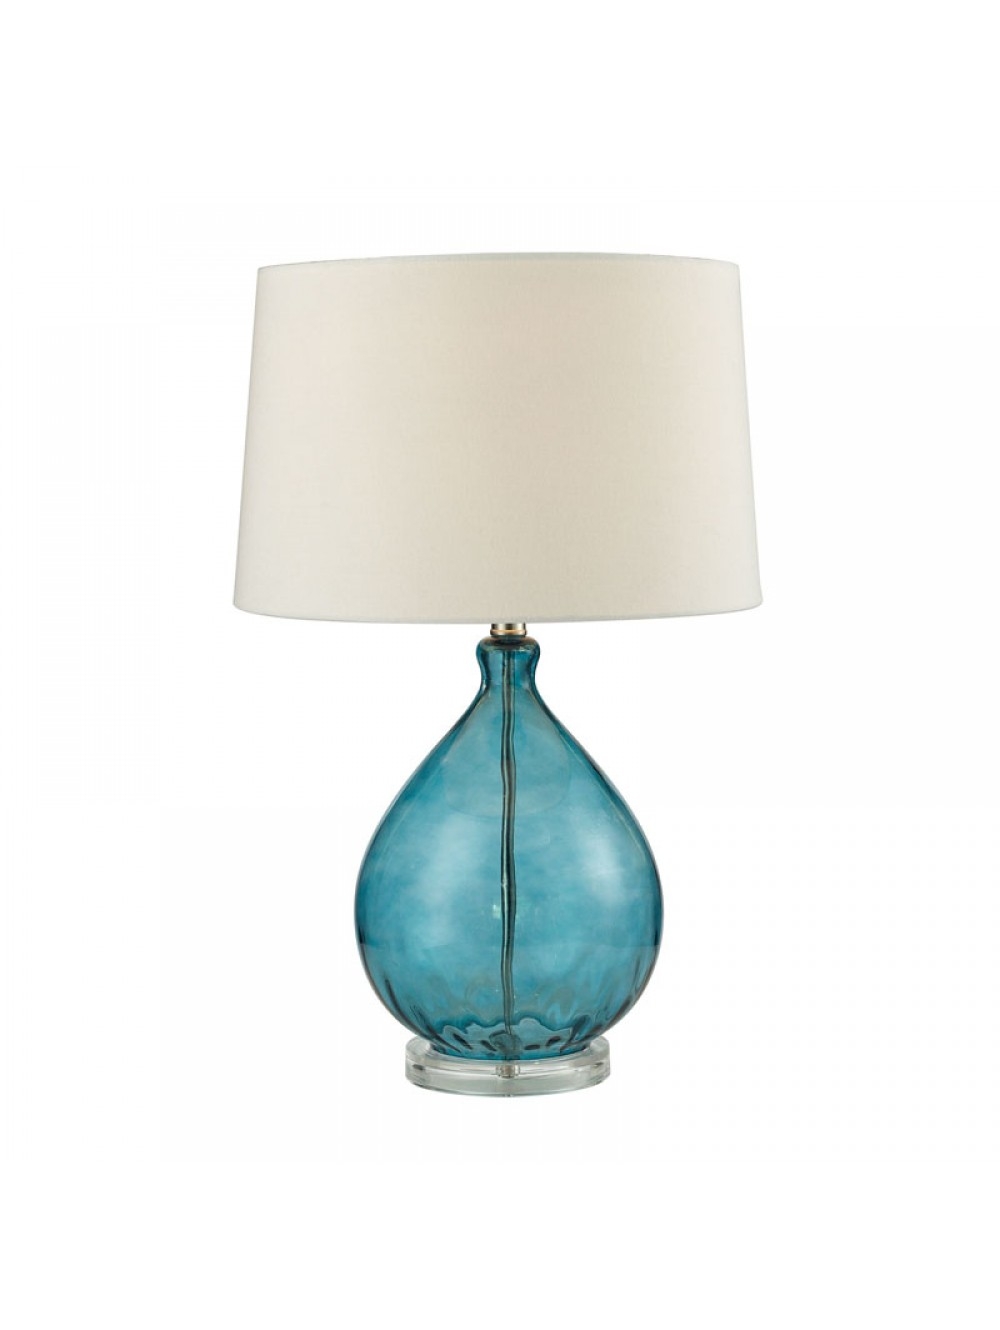 ANNABELLE TABLE LAMP, BLUE - Image 0